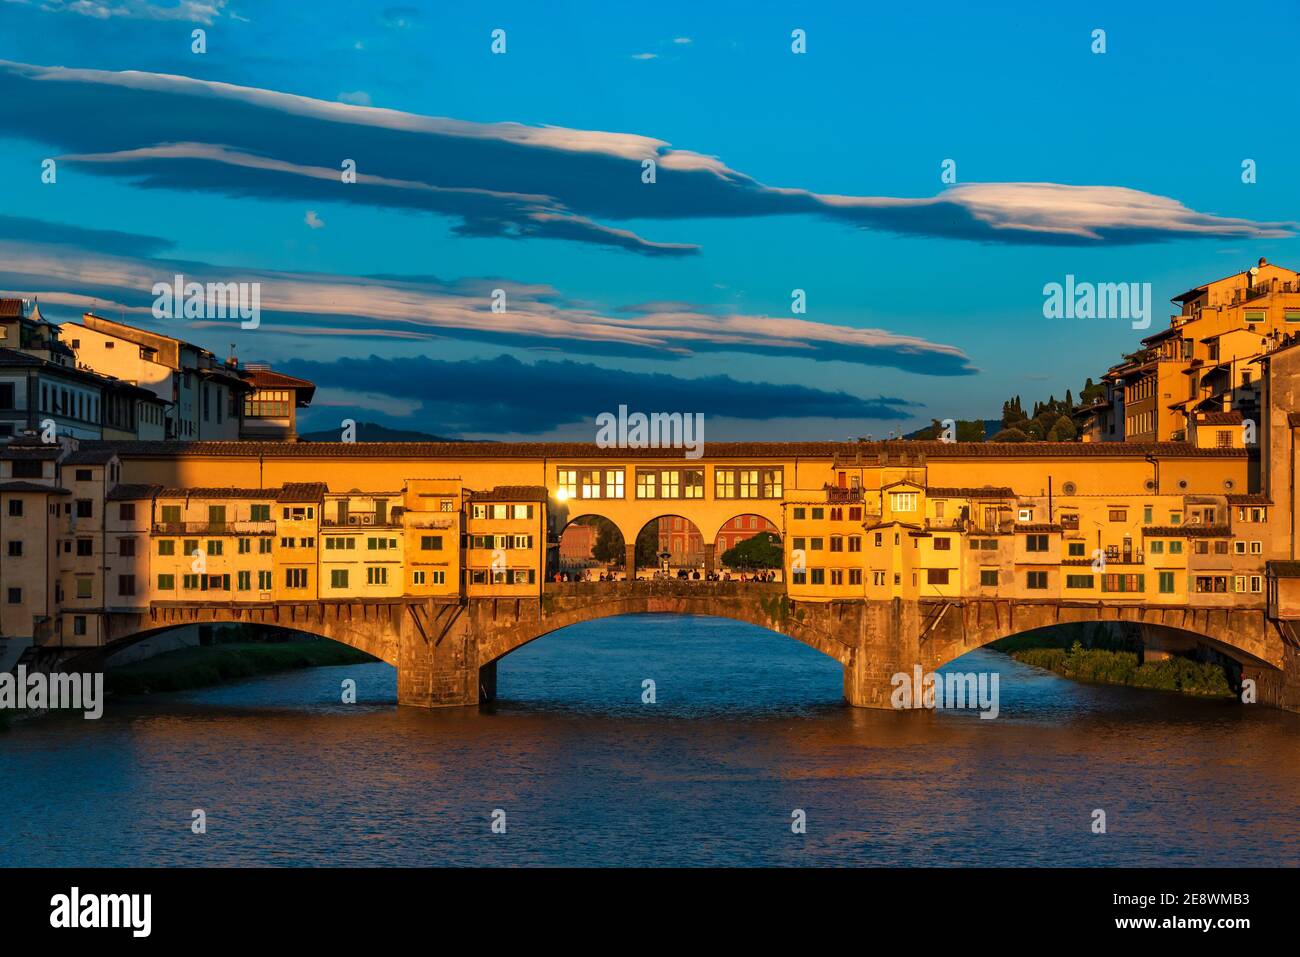 the famous Ponte Vecchio of Florence captured at the golden hour with some strange clouds in the sky Stock Photo